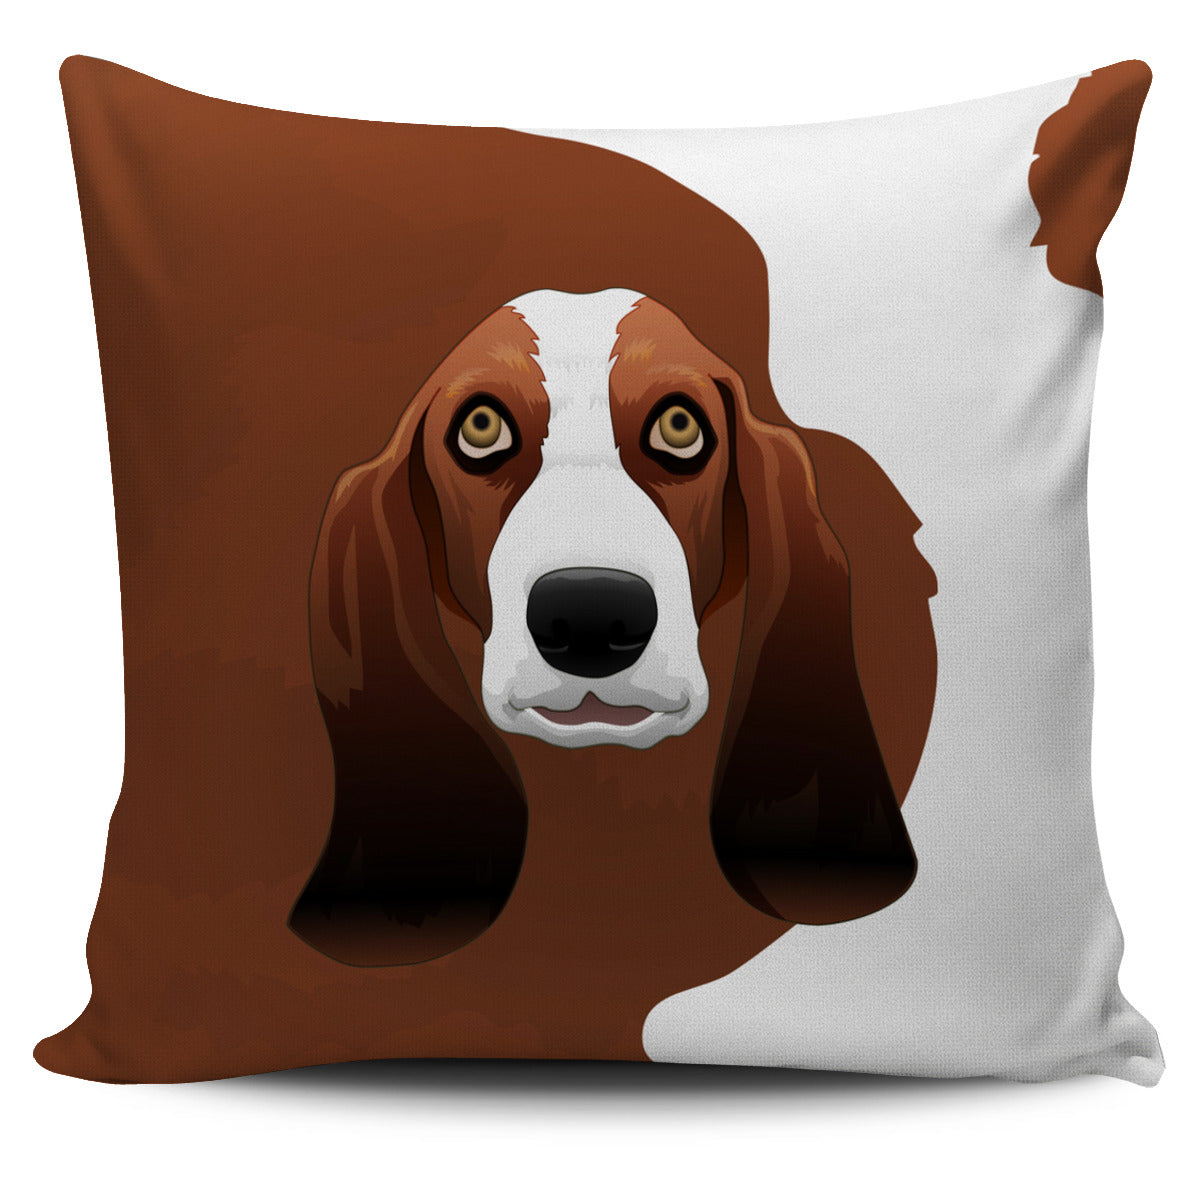 Real Basset Hound Pillow Cover